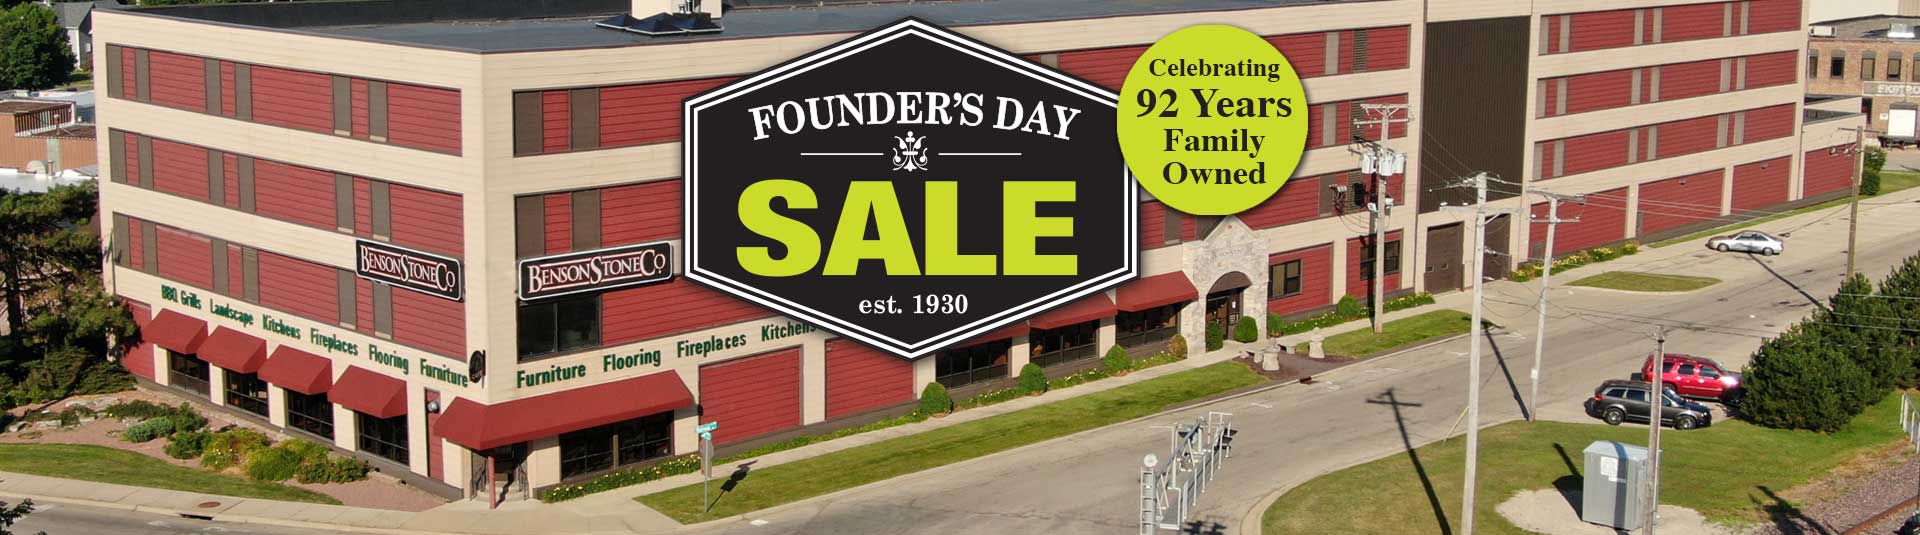 Save on Furniture, Flooring, Granite & More at the Founder's Day Sale at Benson Stone Company!